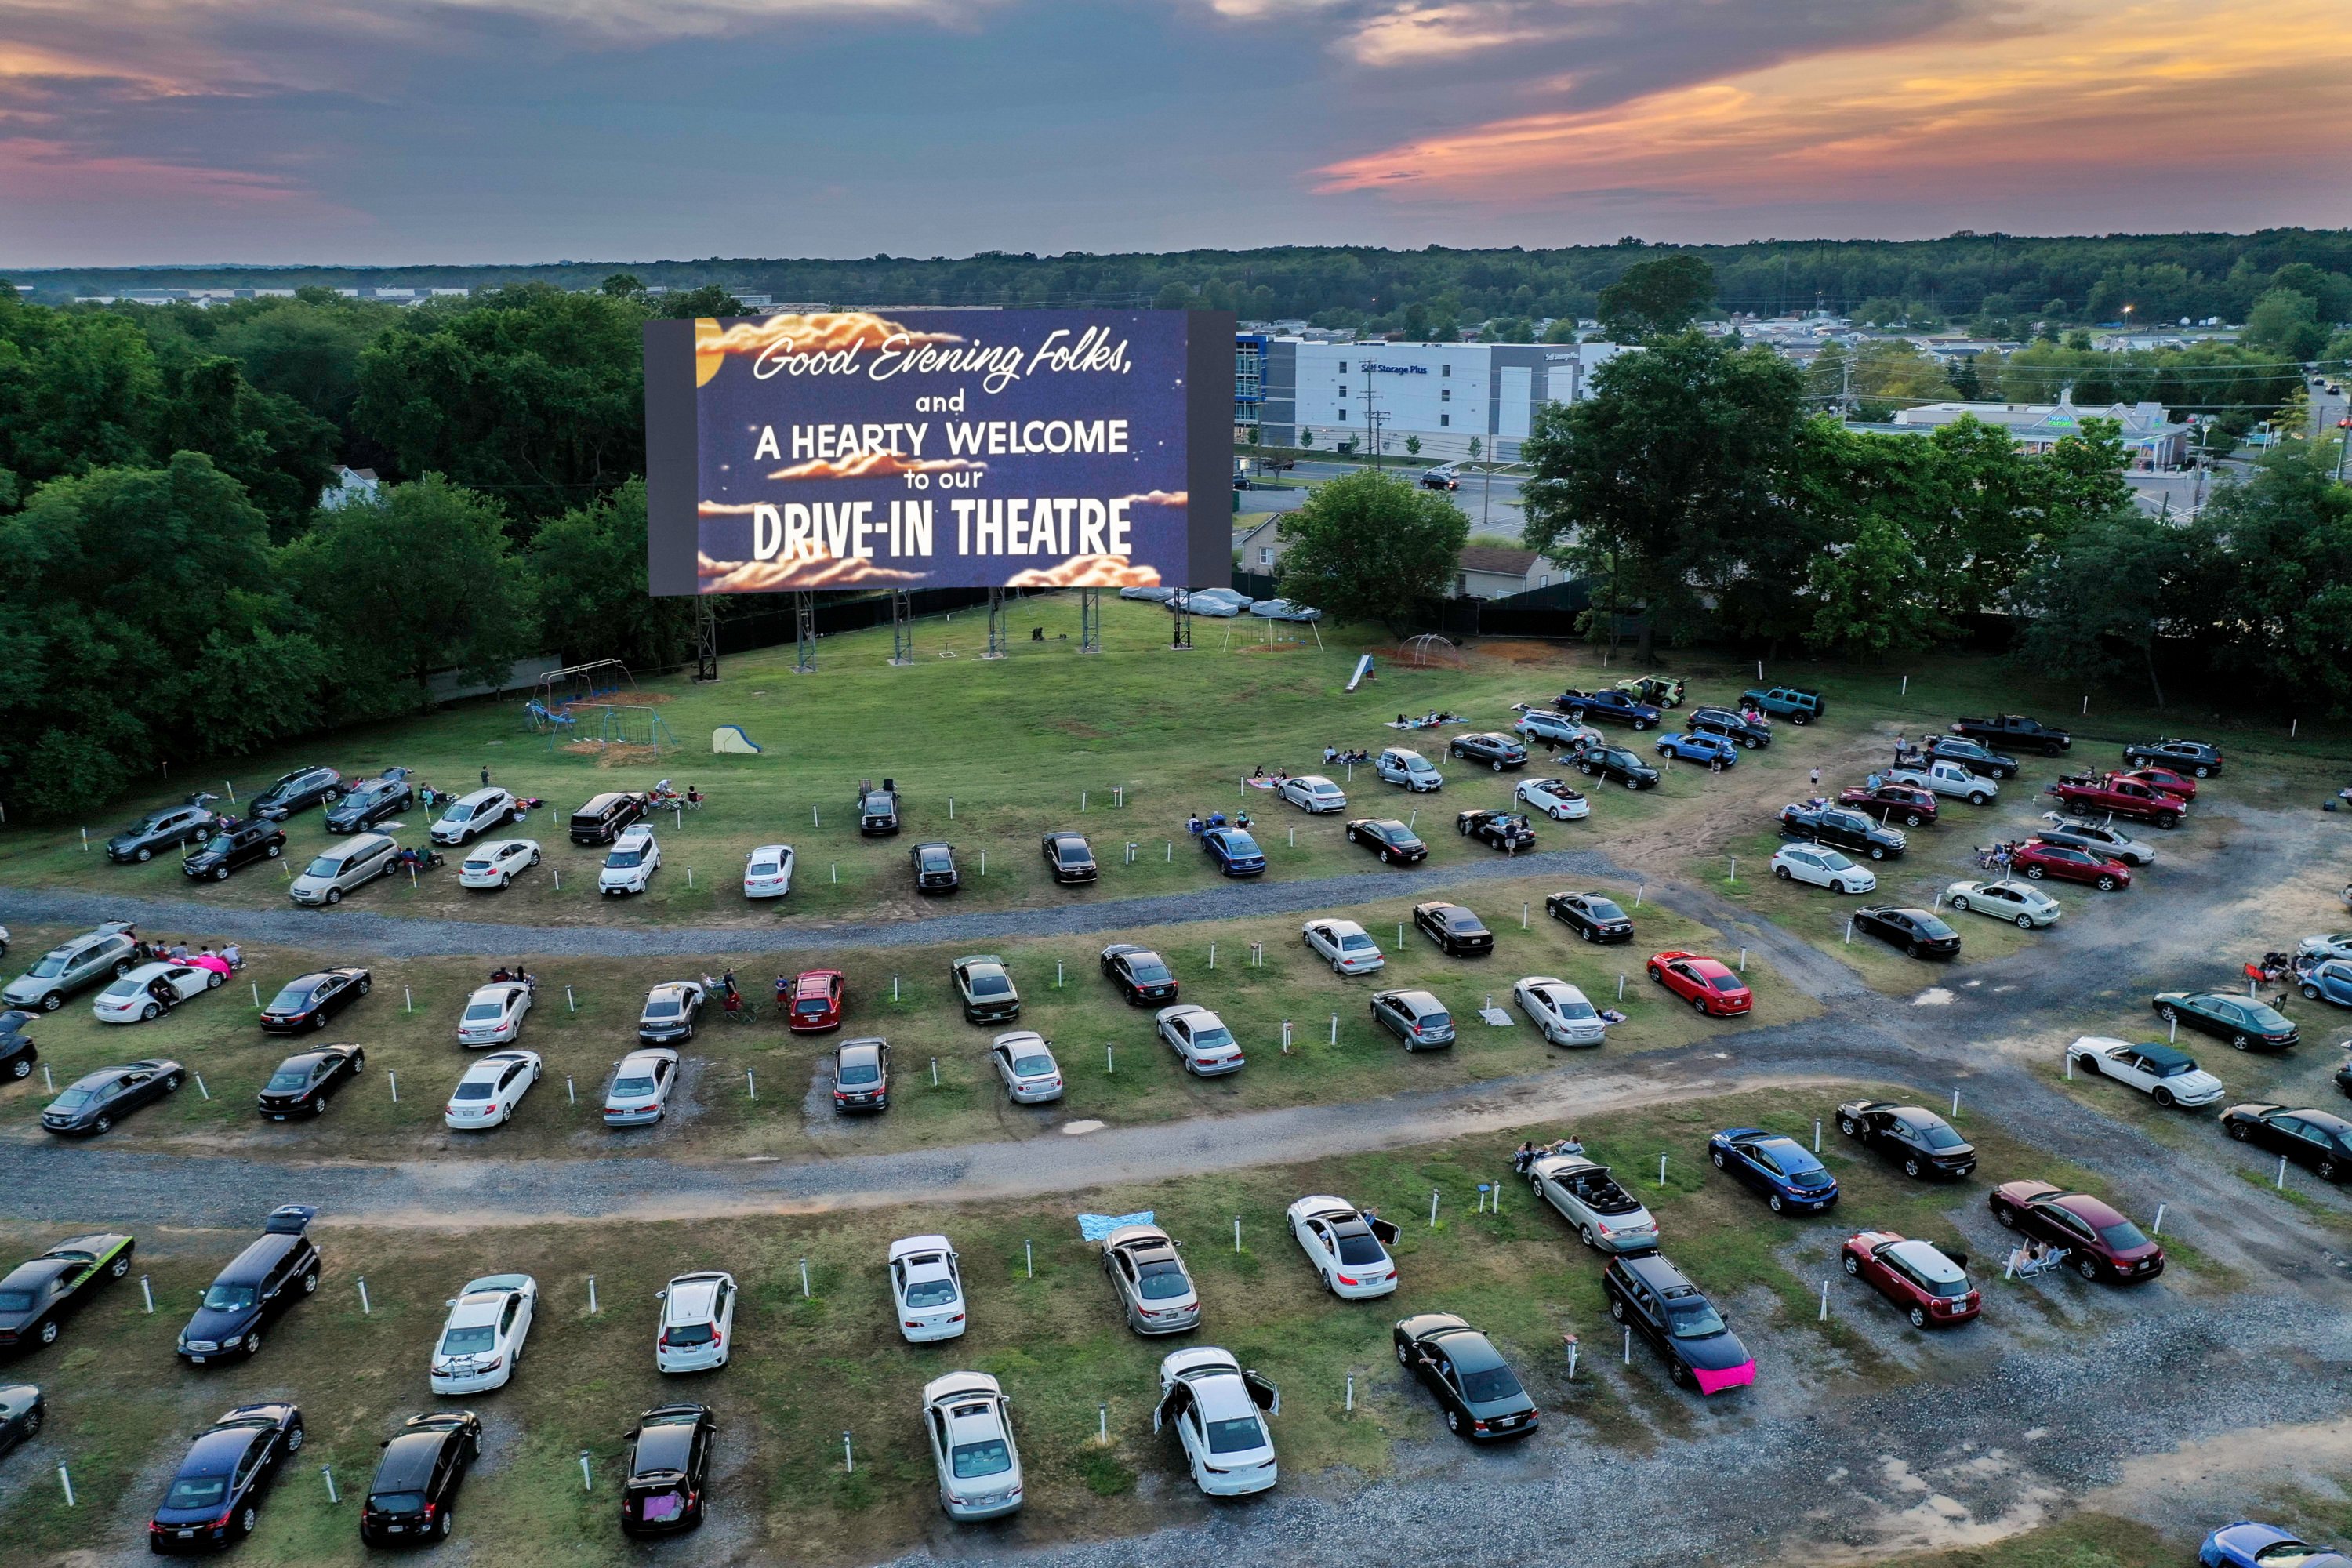 Check Out These Cool Aerial Drone Photos Of A Drive-in Movie Theater